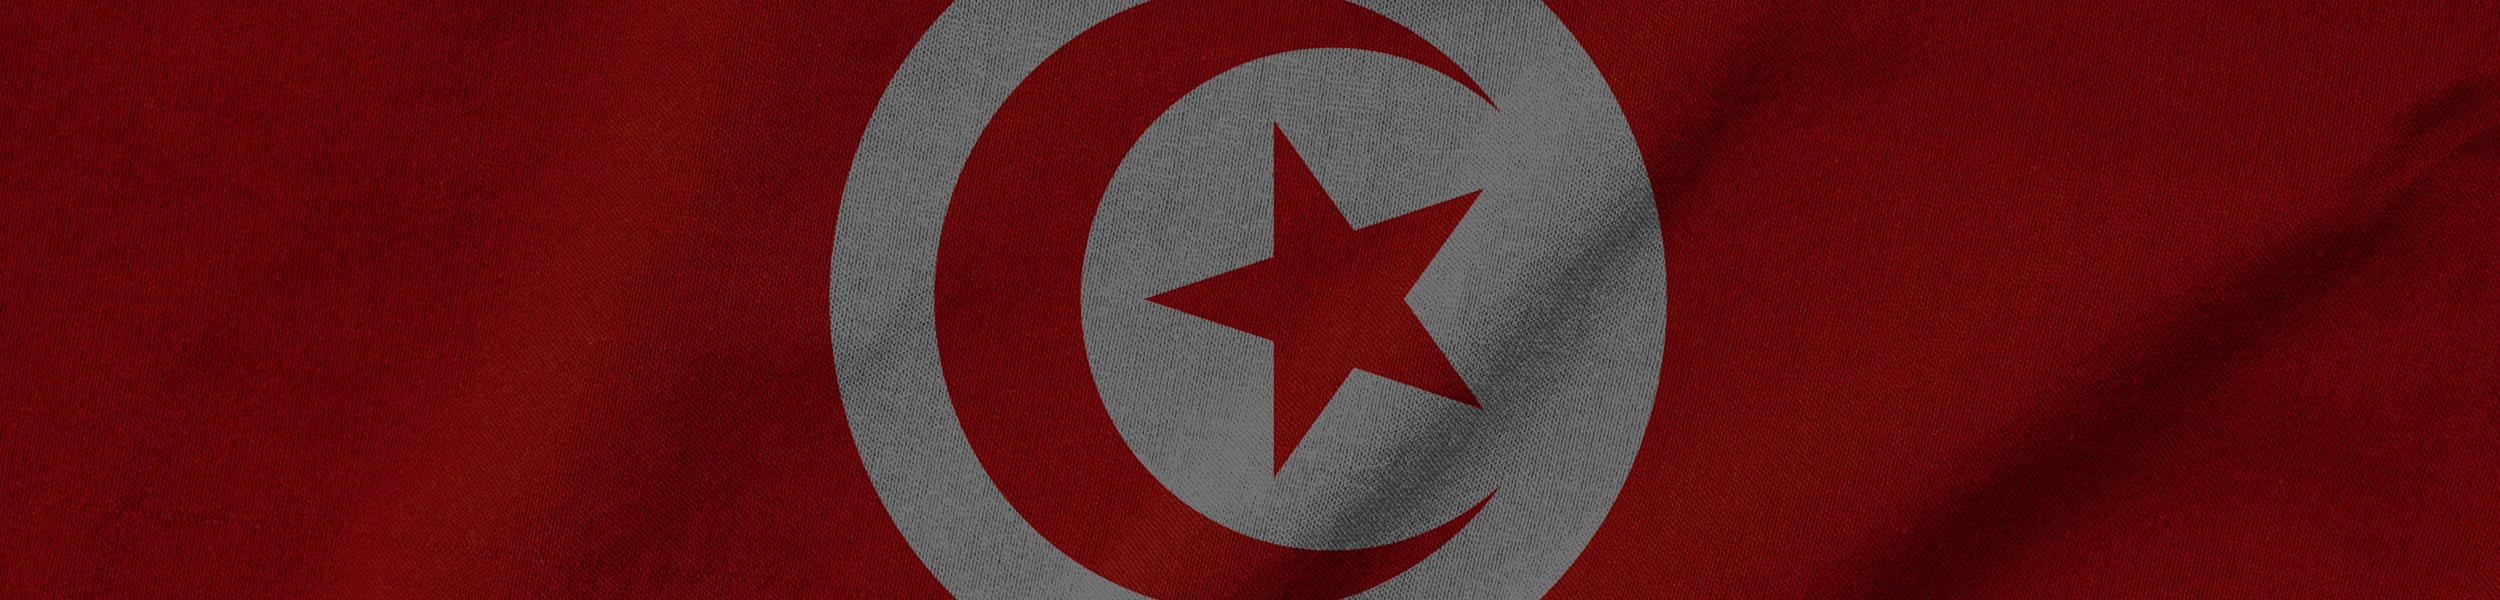 FOR A TUNISIA WHERE EVERYONE CAN LIVE